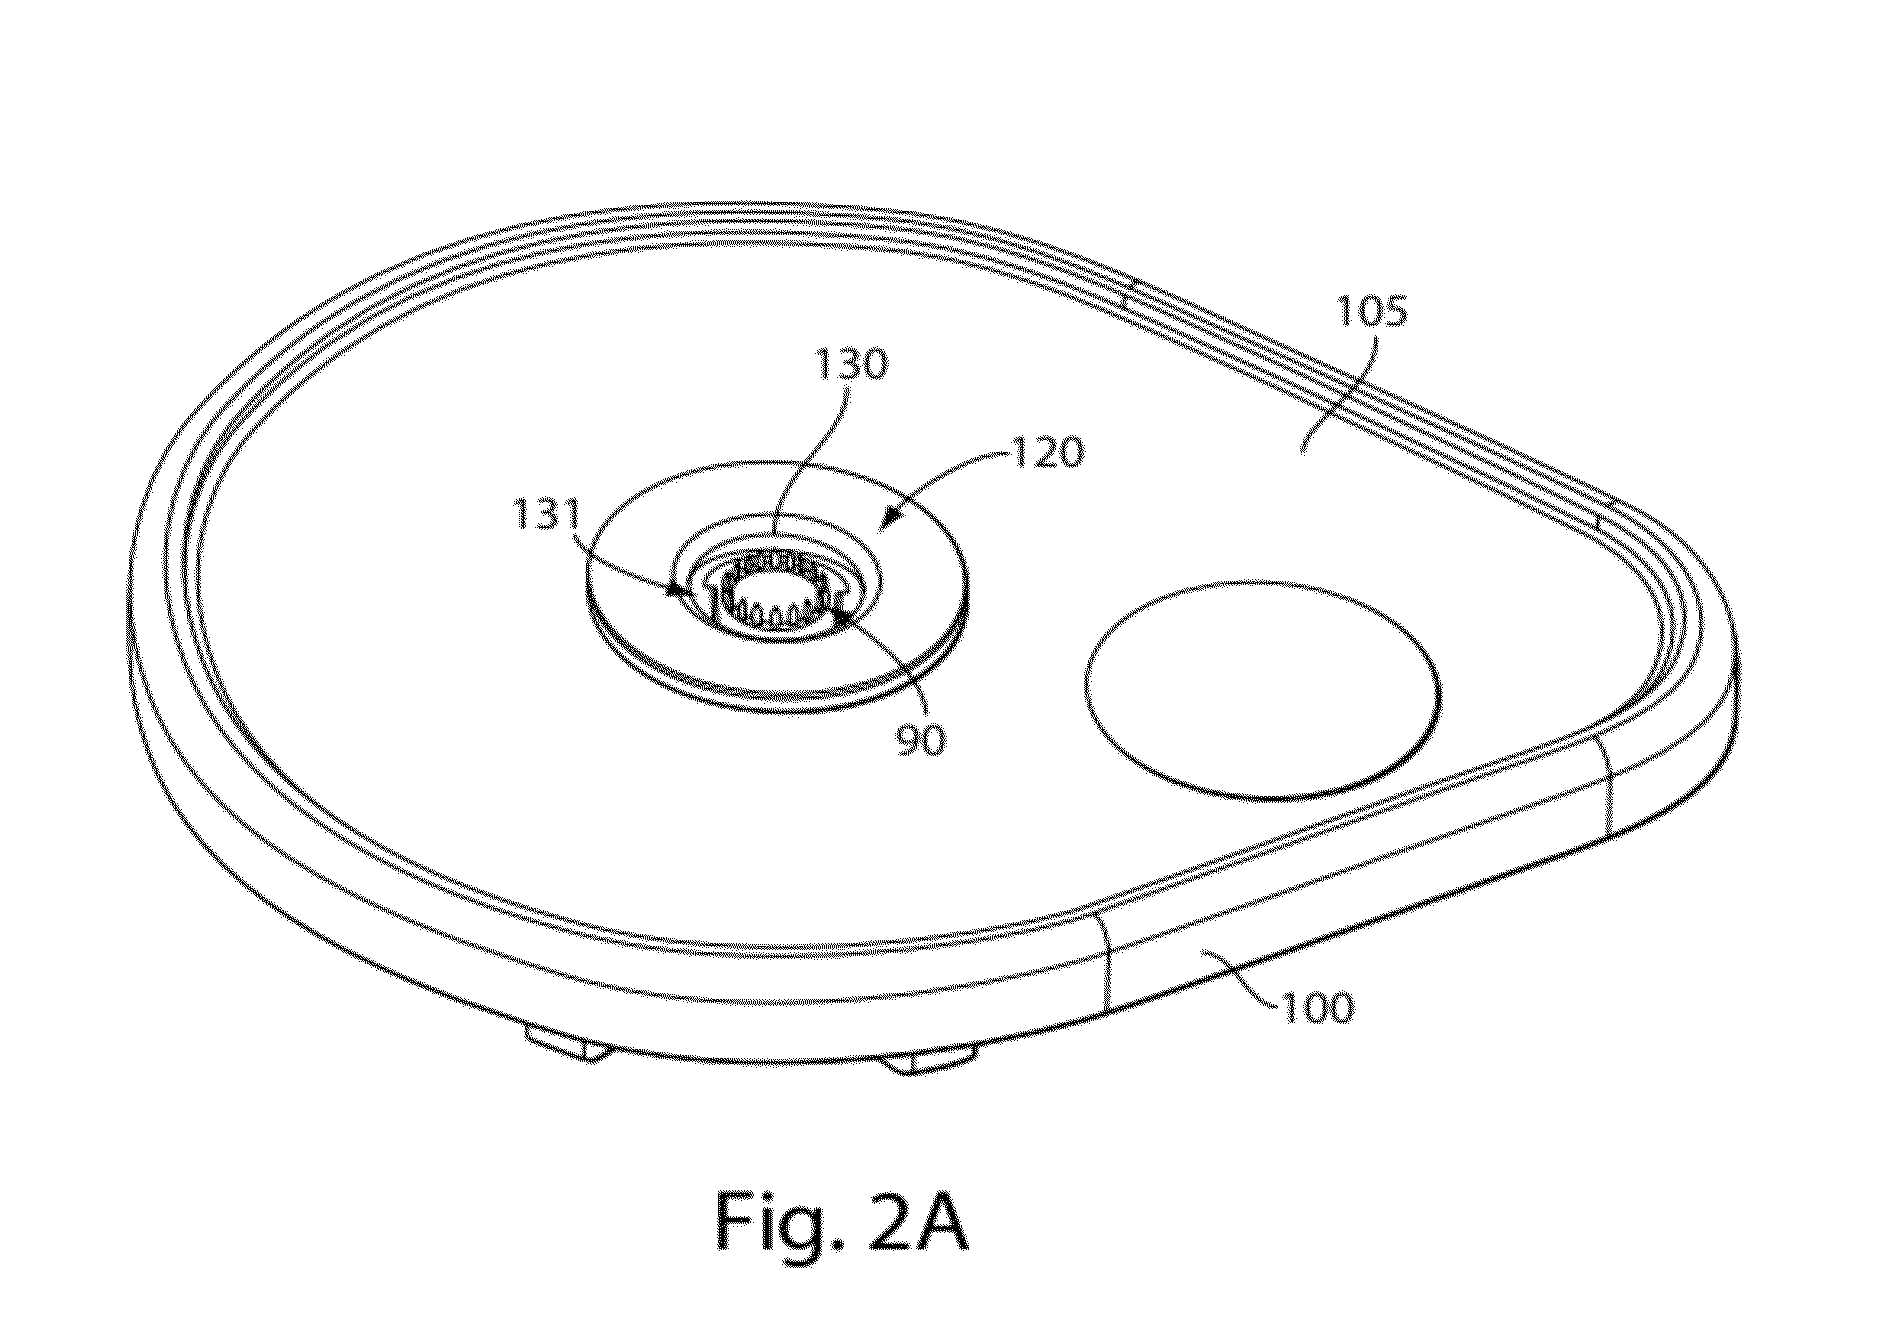 Systems and methods for collection and/or manipulation of blood spots or other bodily fluids